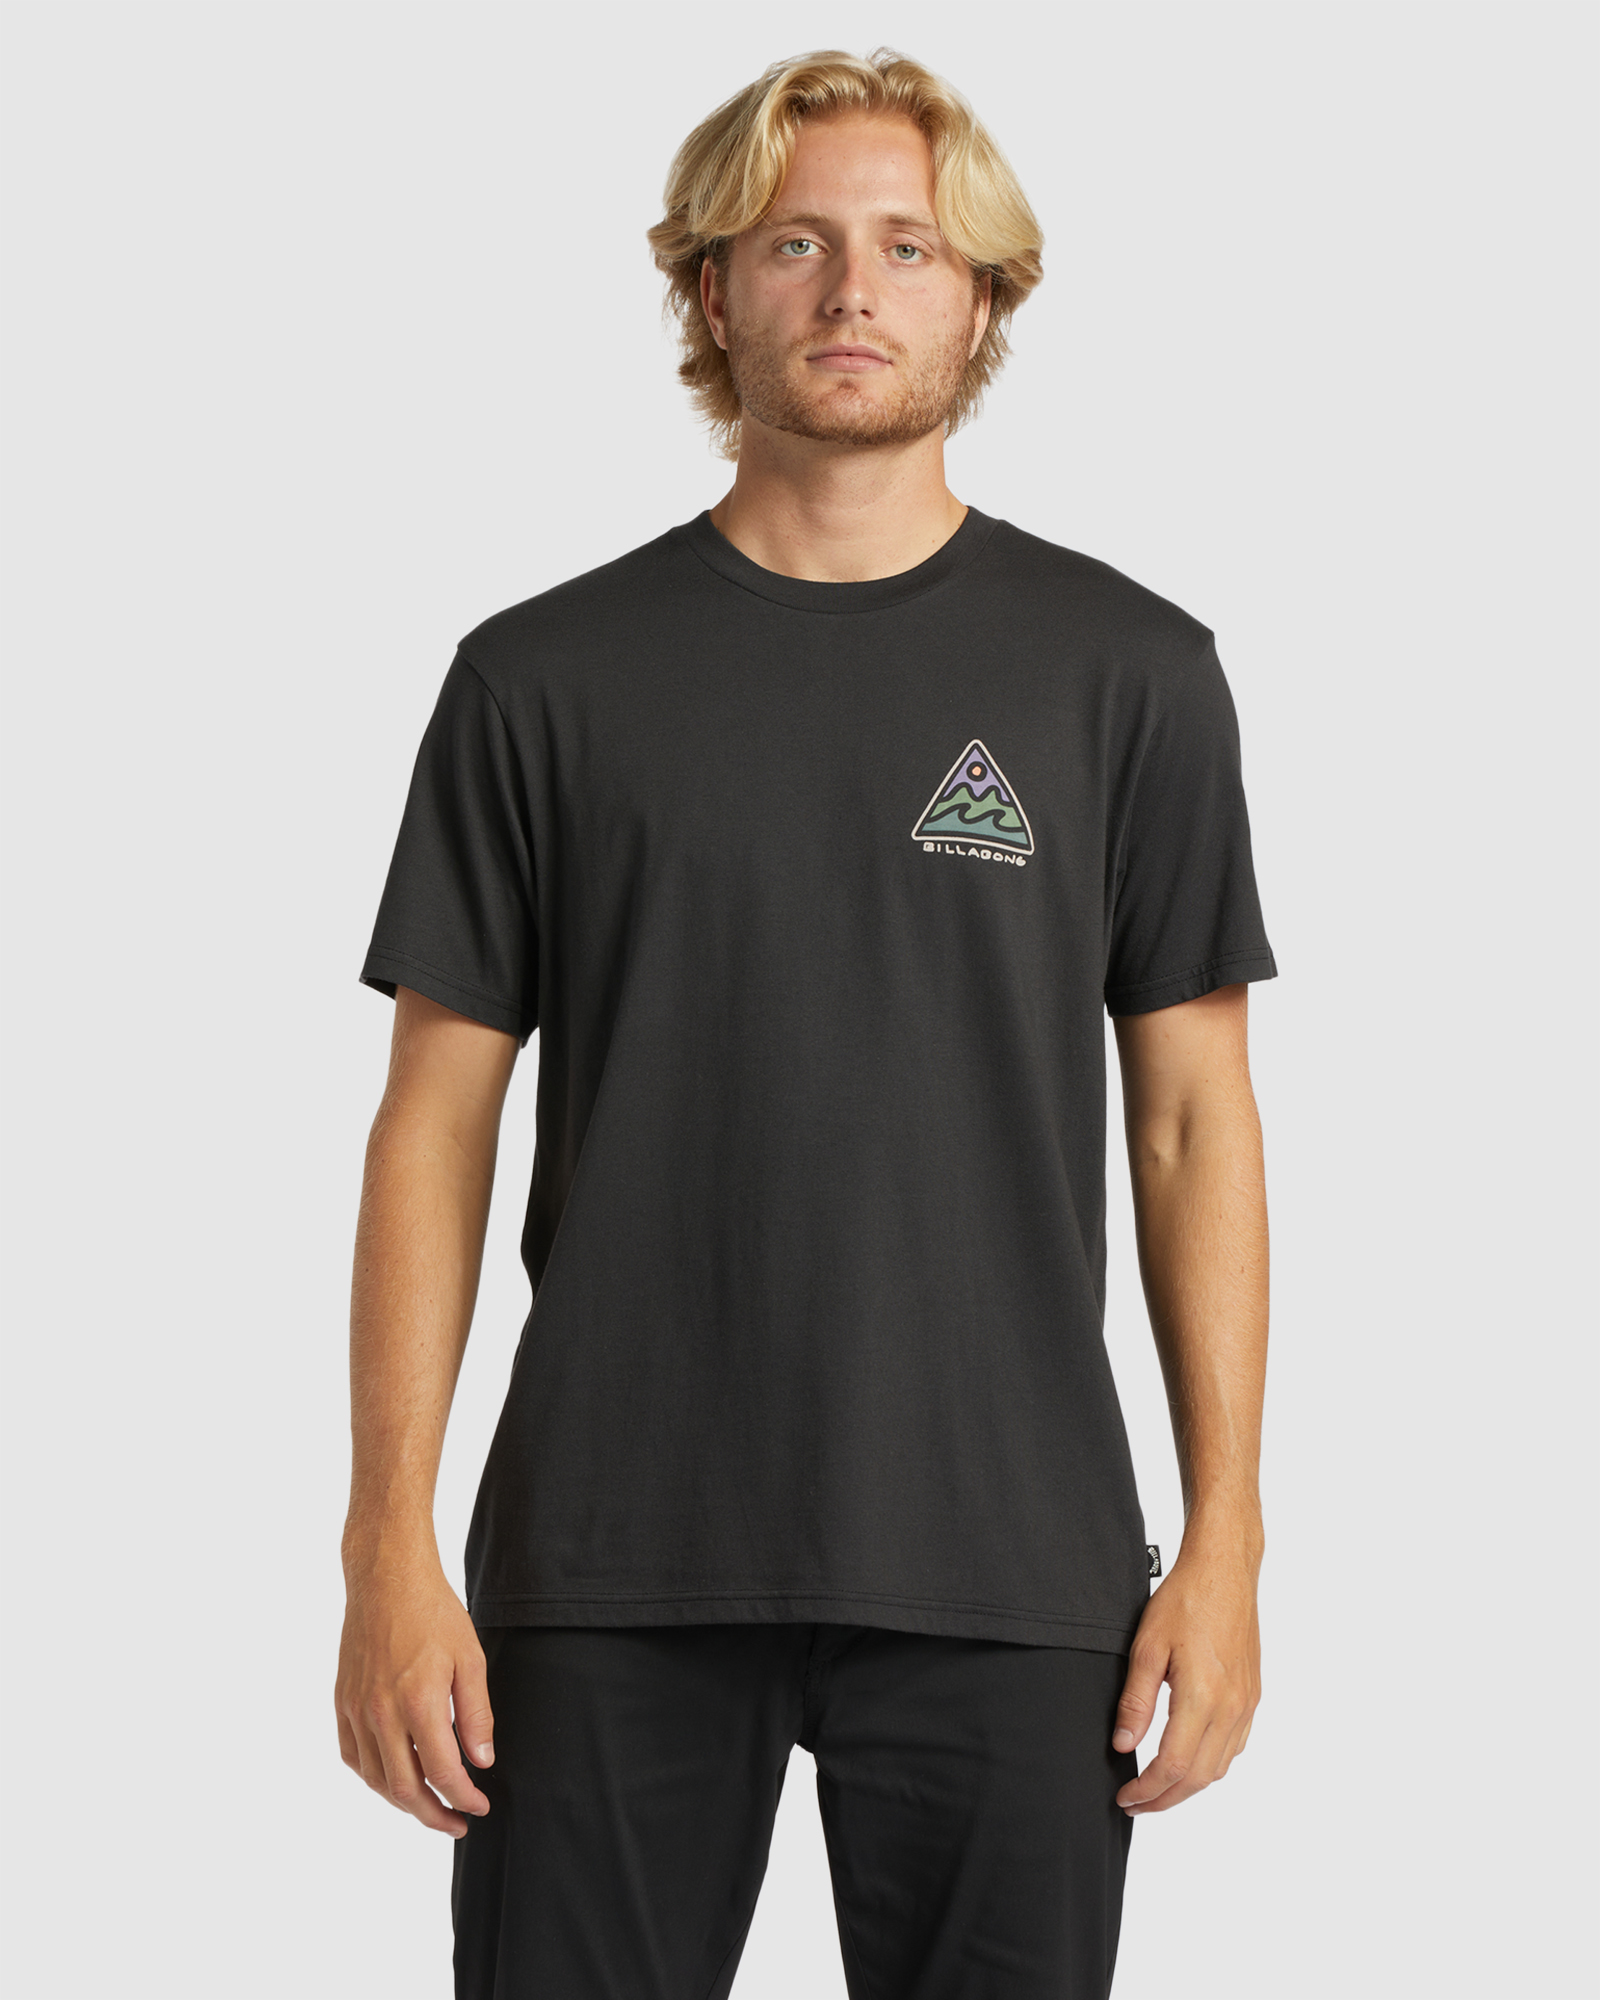 Billabong Frontier Ss Tee - Washed Black | SurfStitch